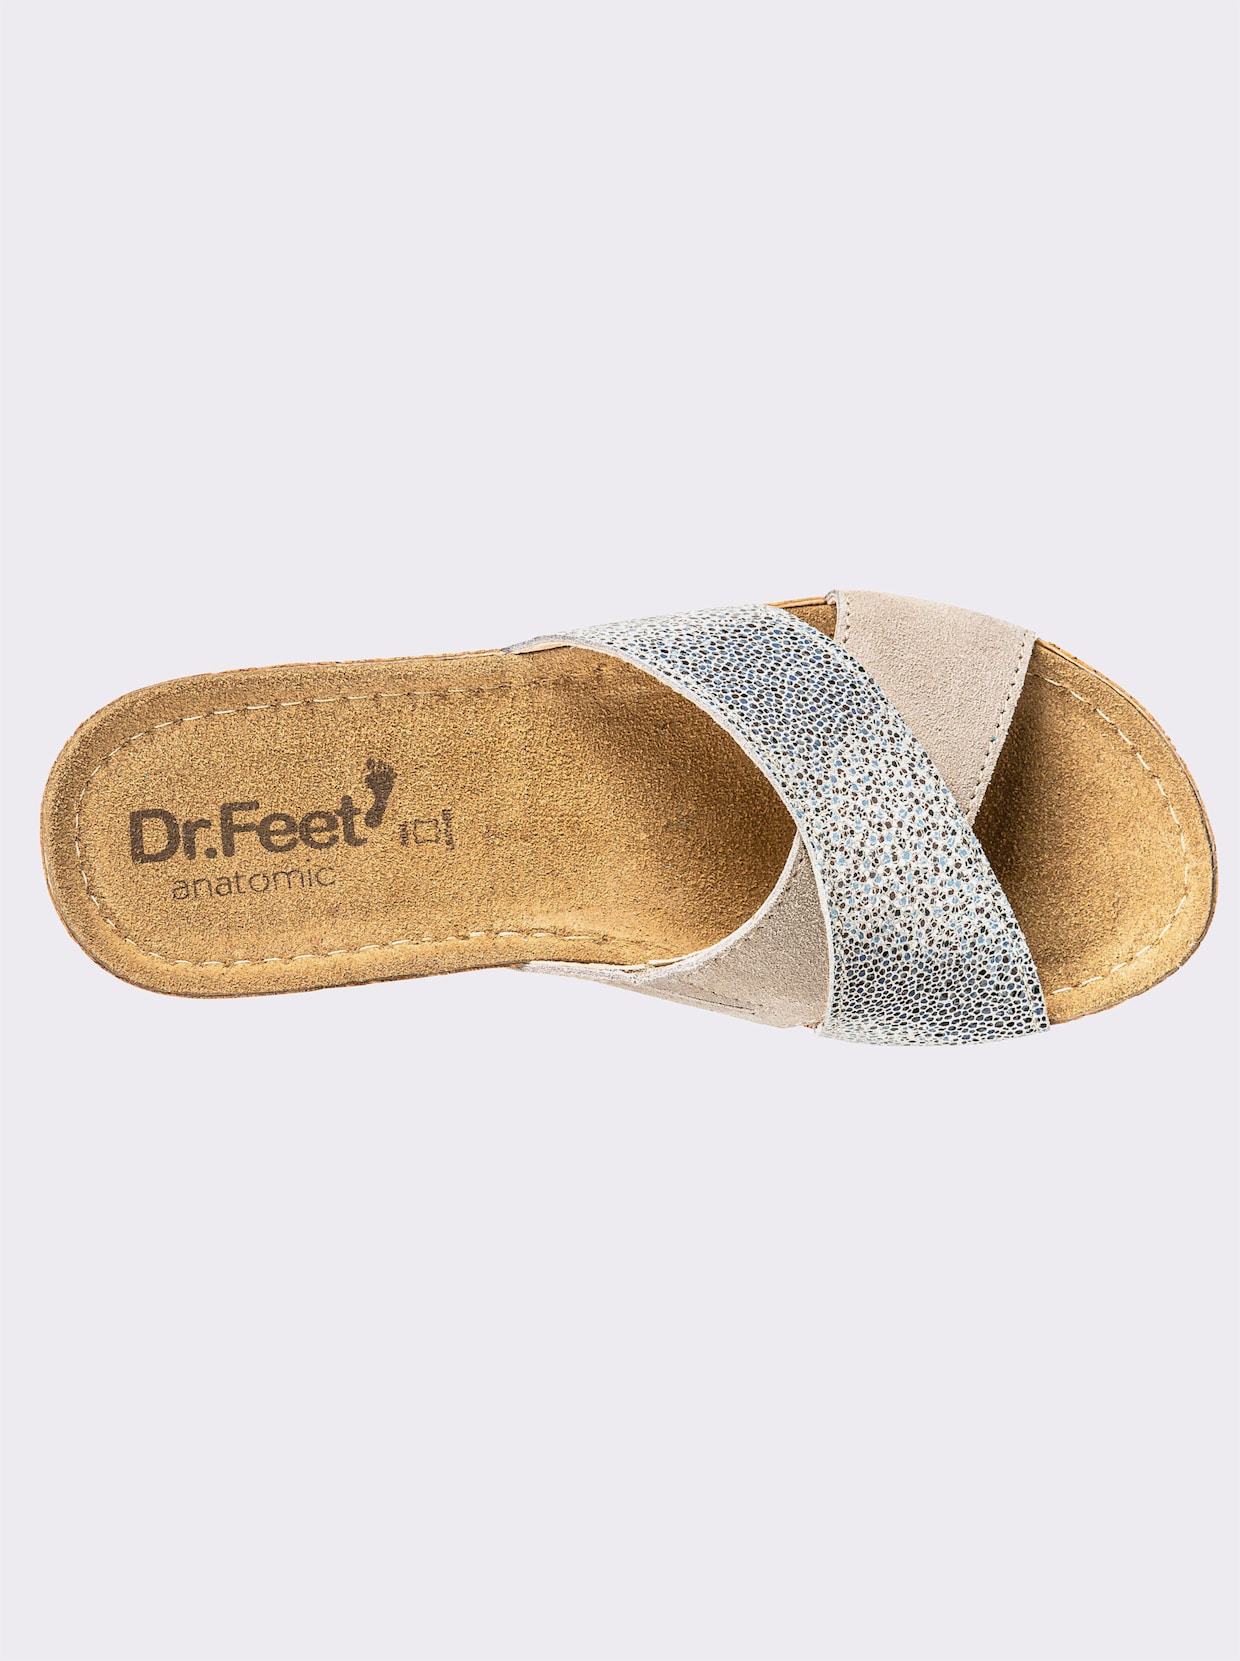 Dr. Feet slippers - taupe